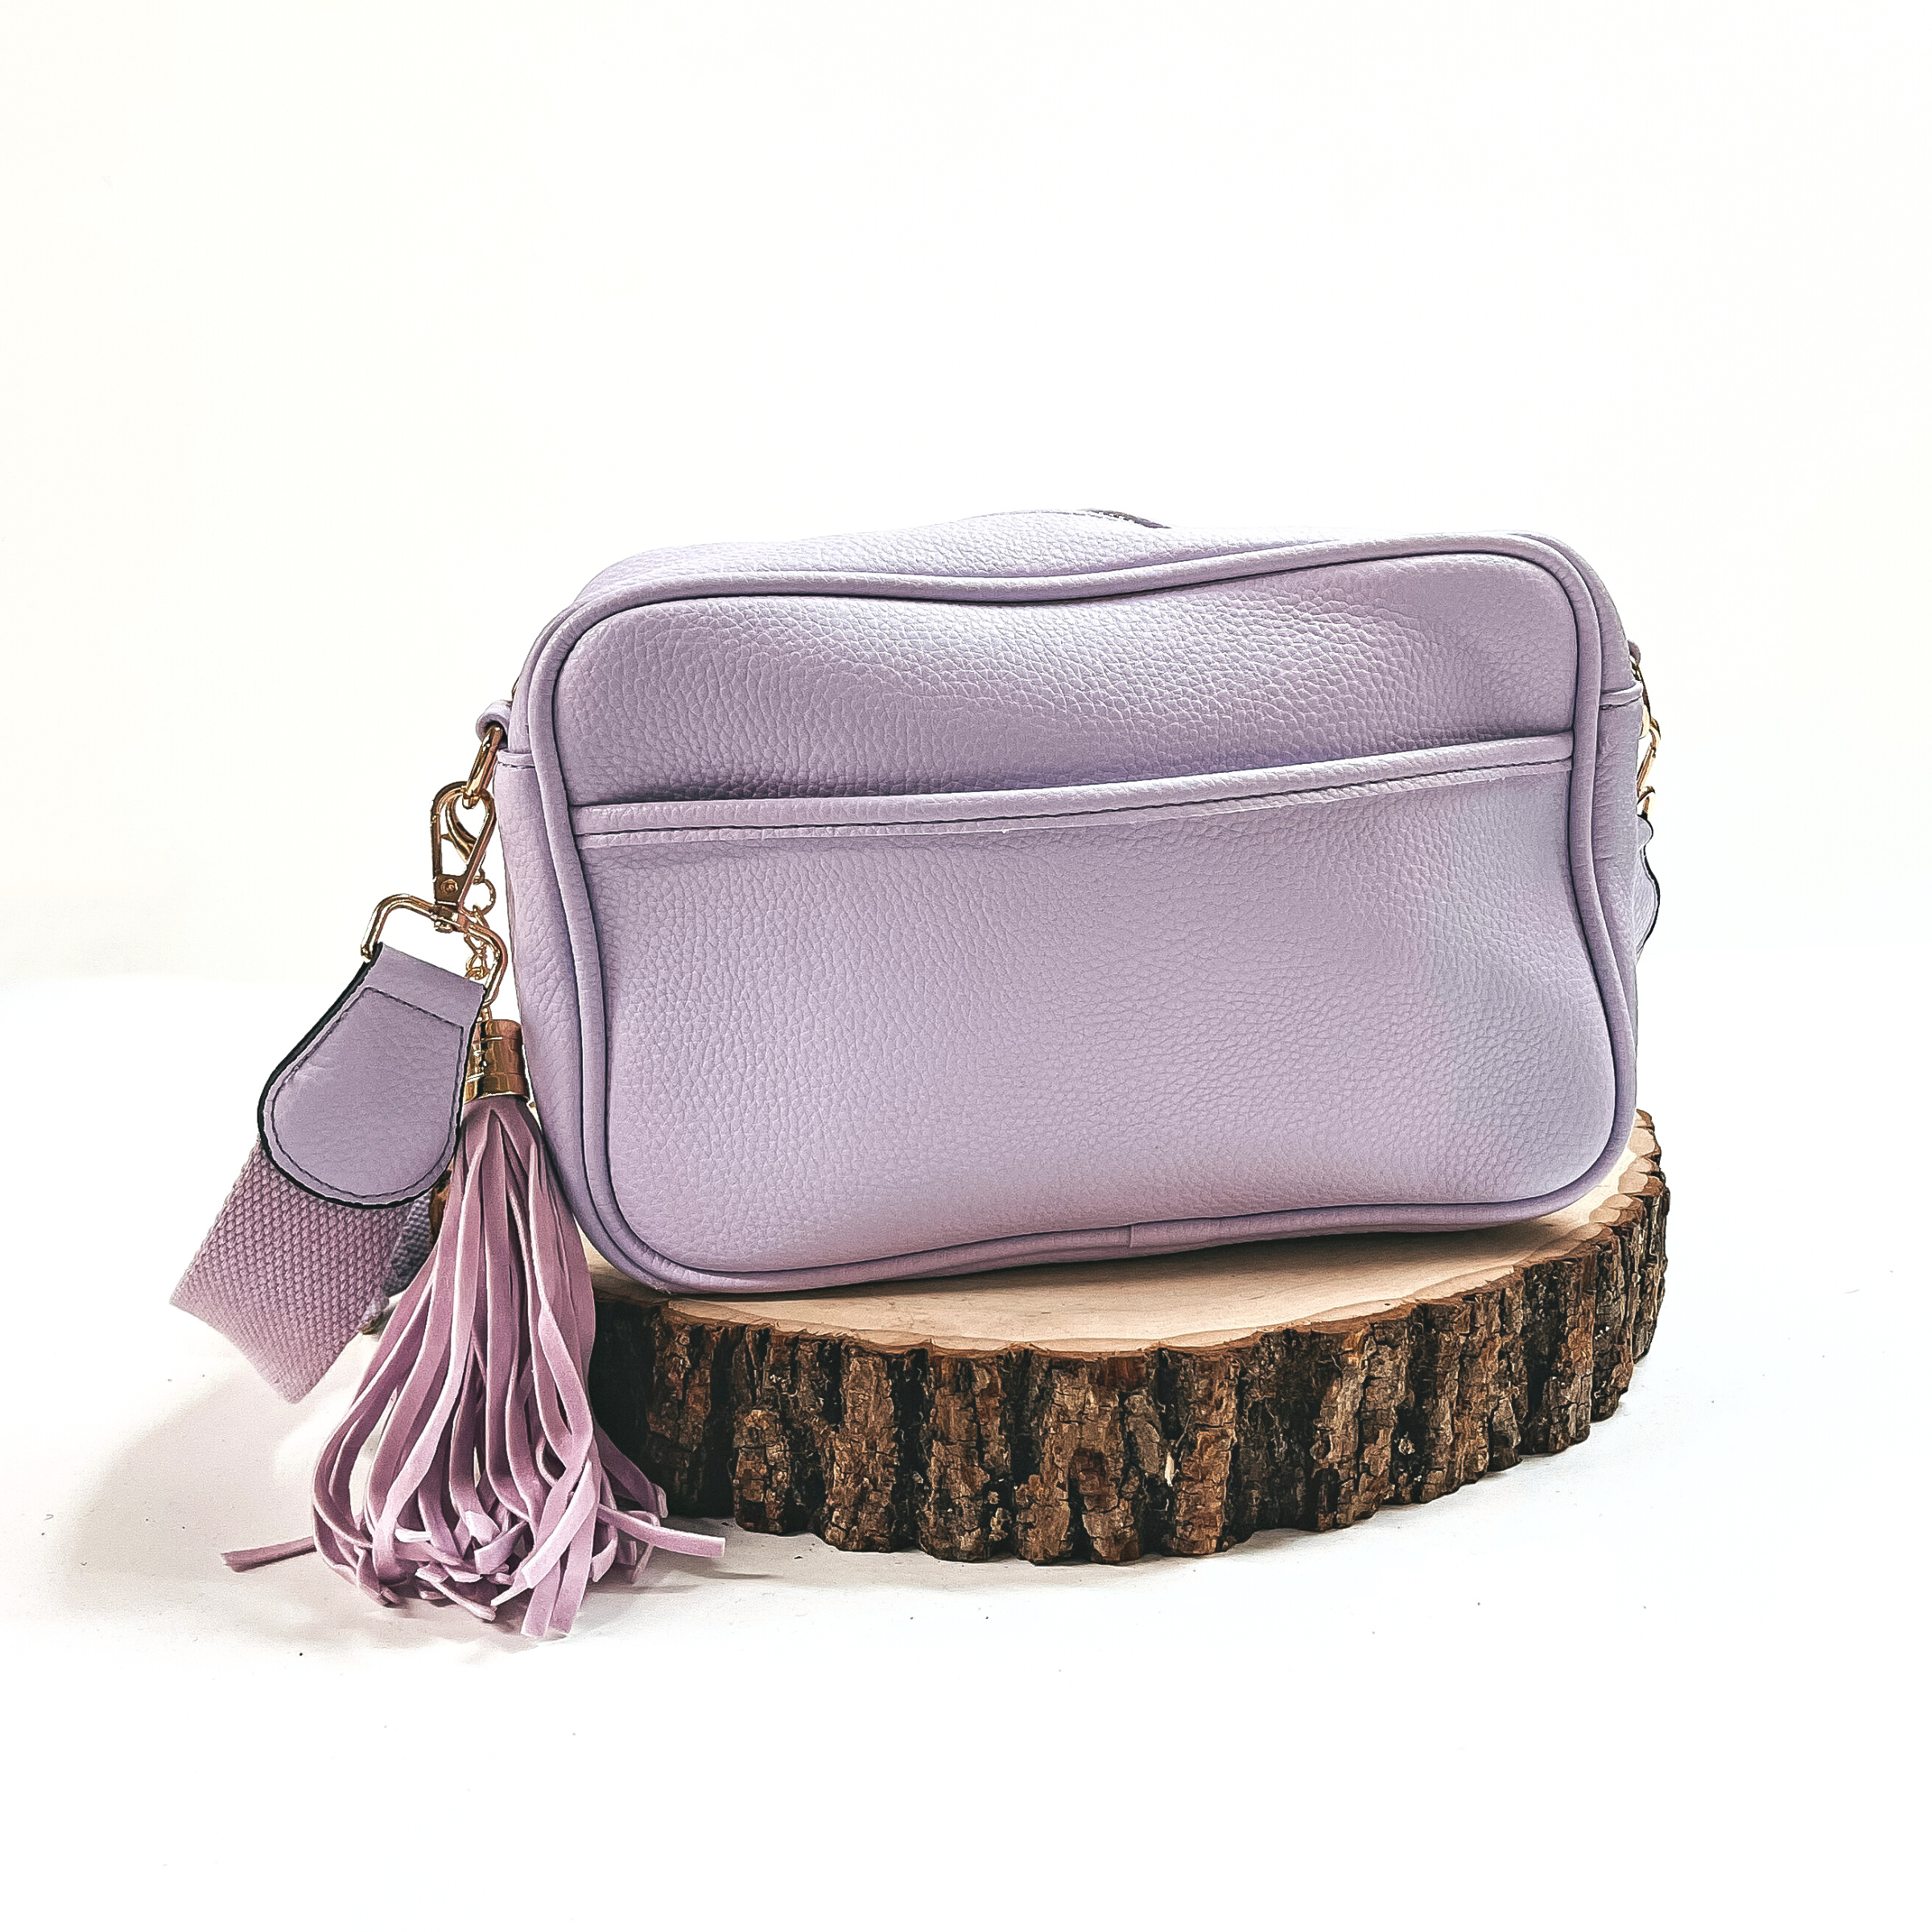 Lovin' Life Small Rectangle Crossbody Purse in Light Purple - Giddy Up Glamour Boutique